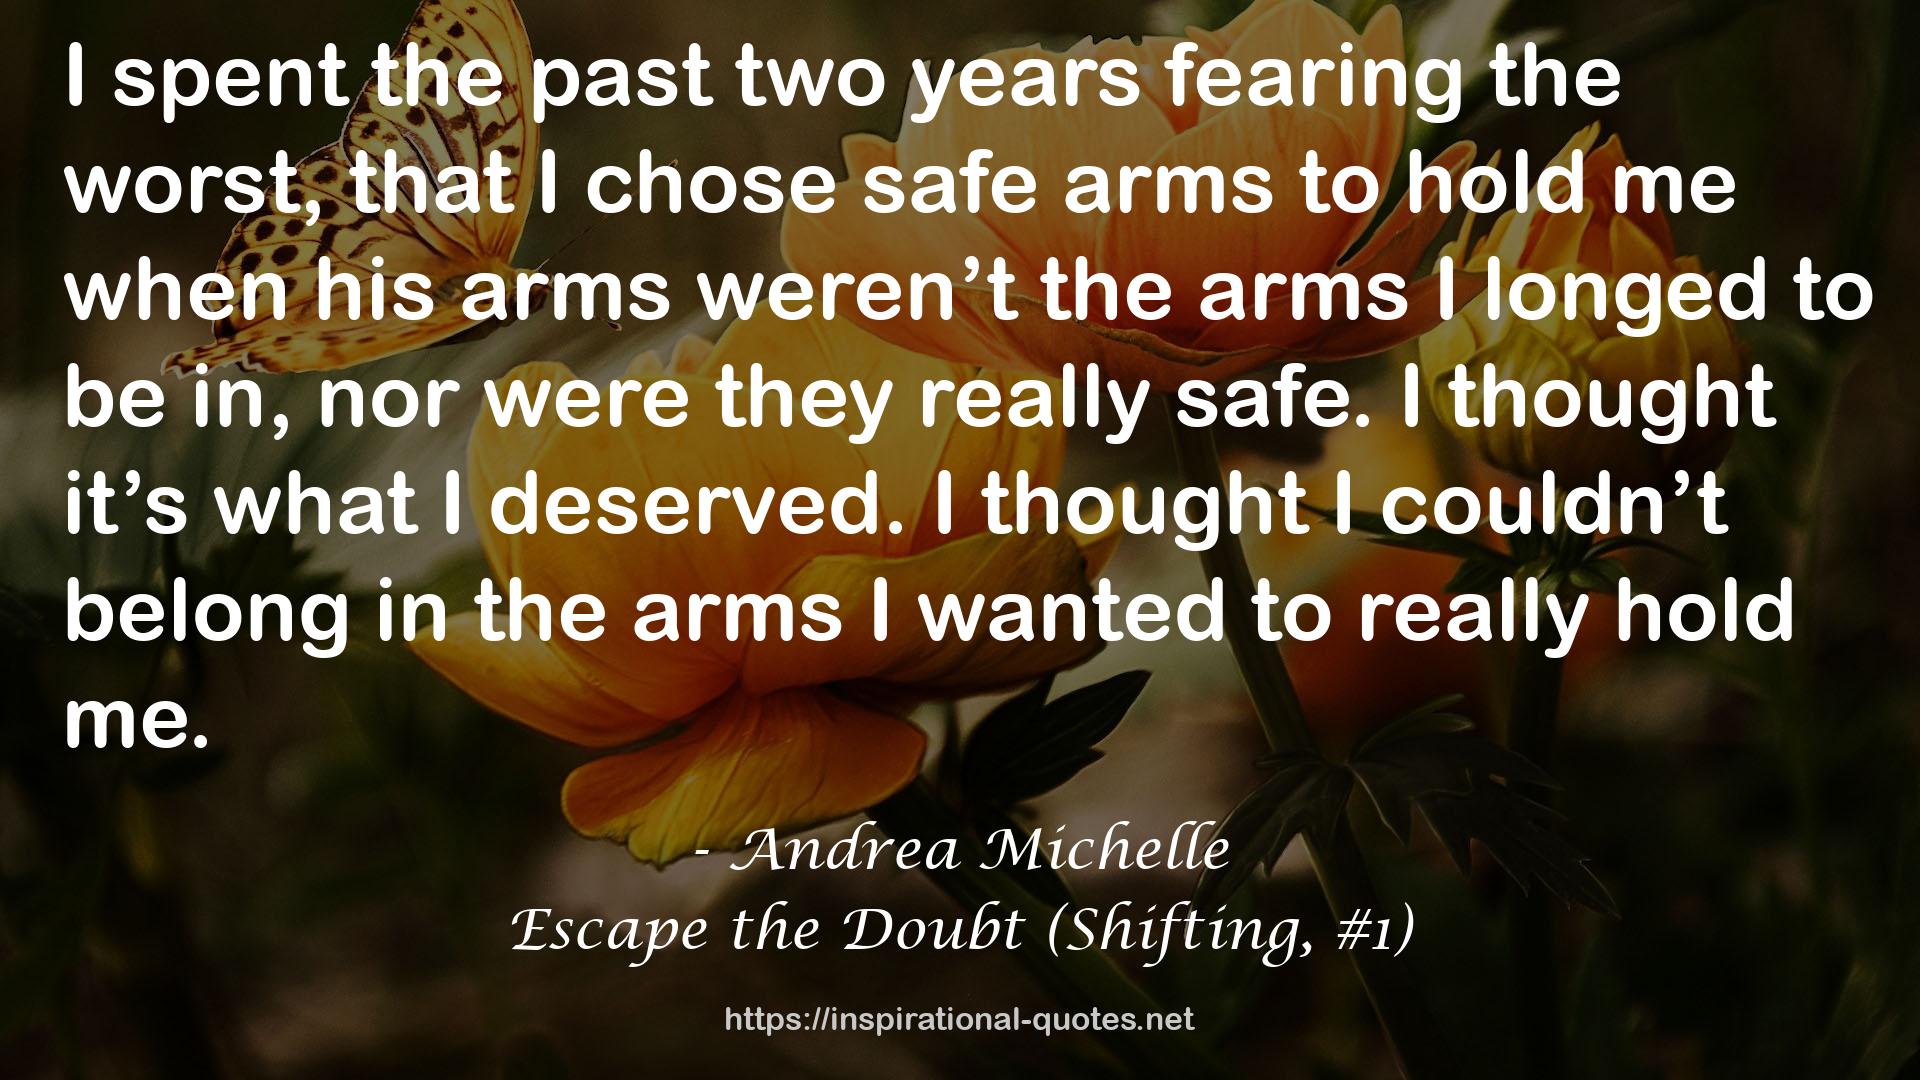 Escape the Doubt (Shifting, #1) QUOTES